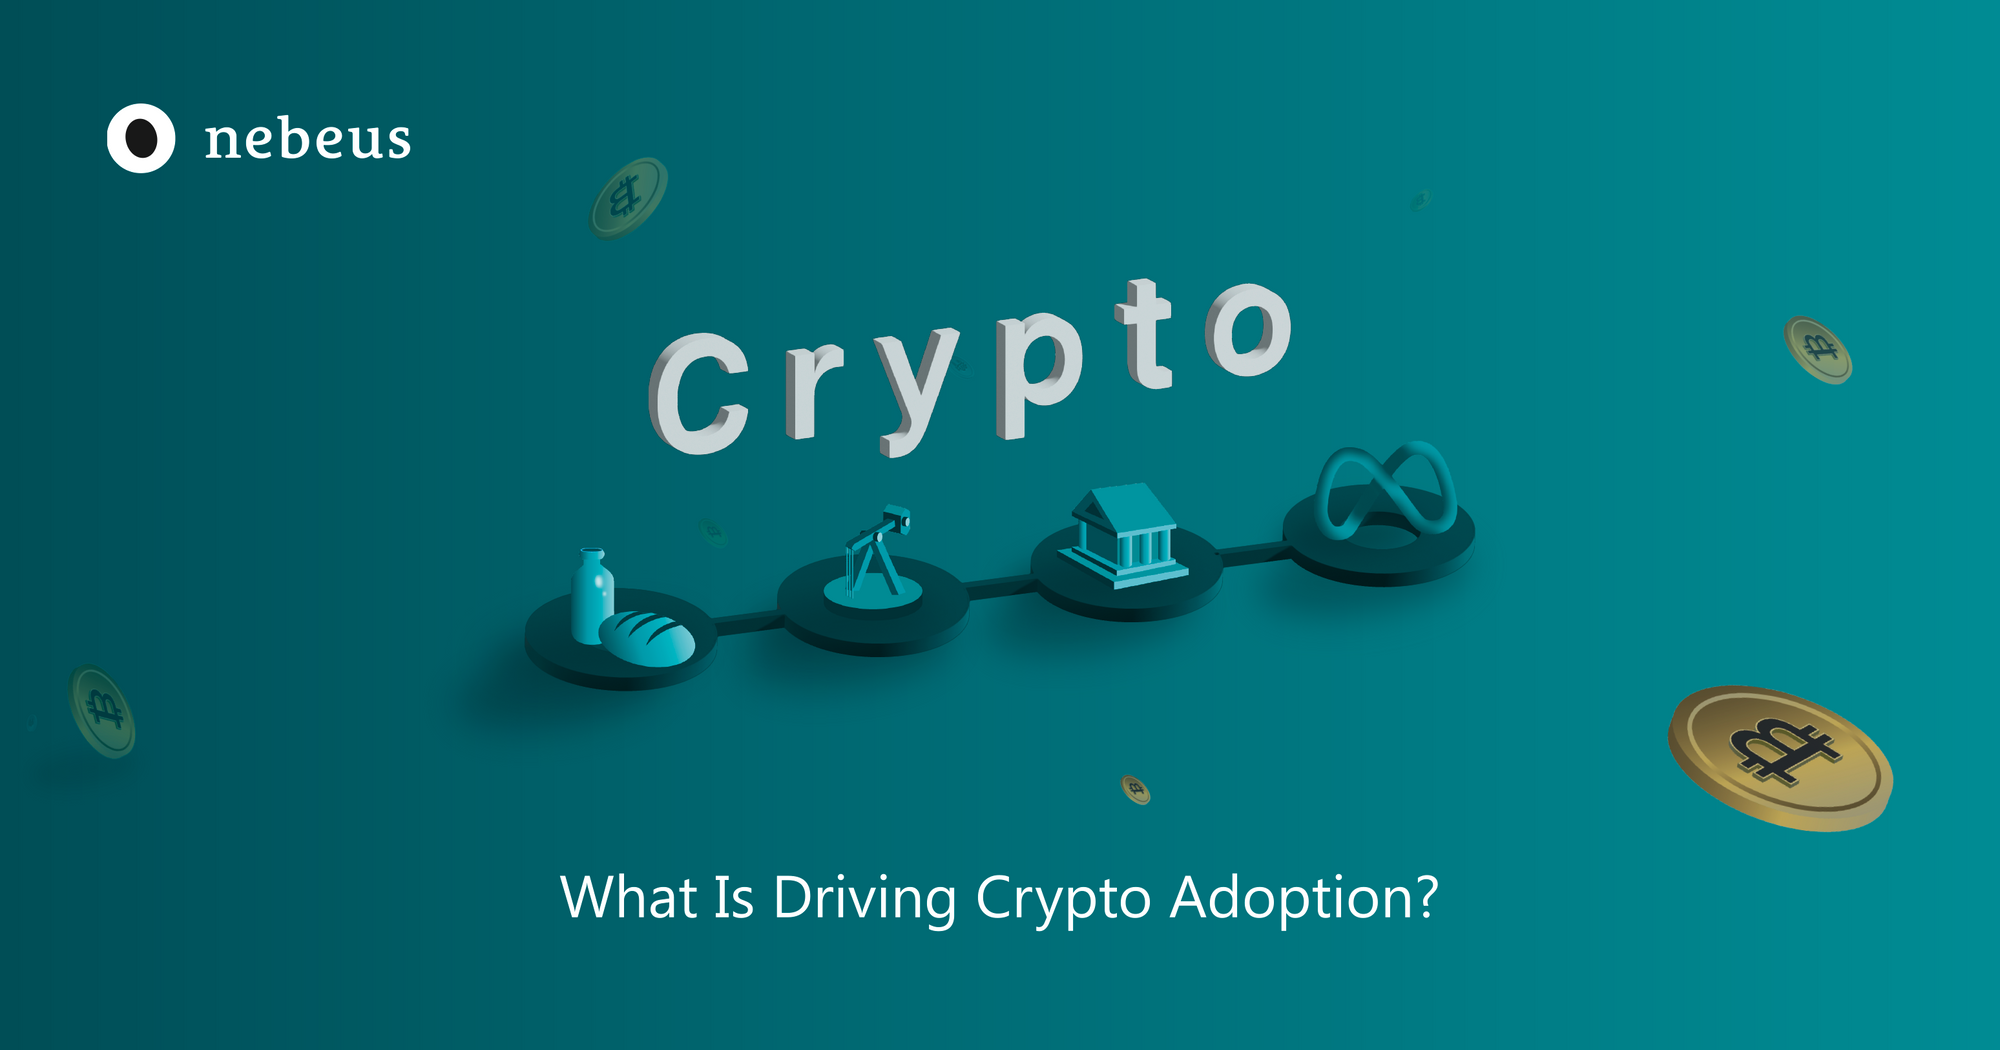 Top 4 Global Driving Forces of Crypto Adoption in 2022